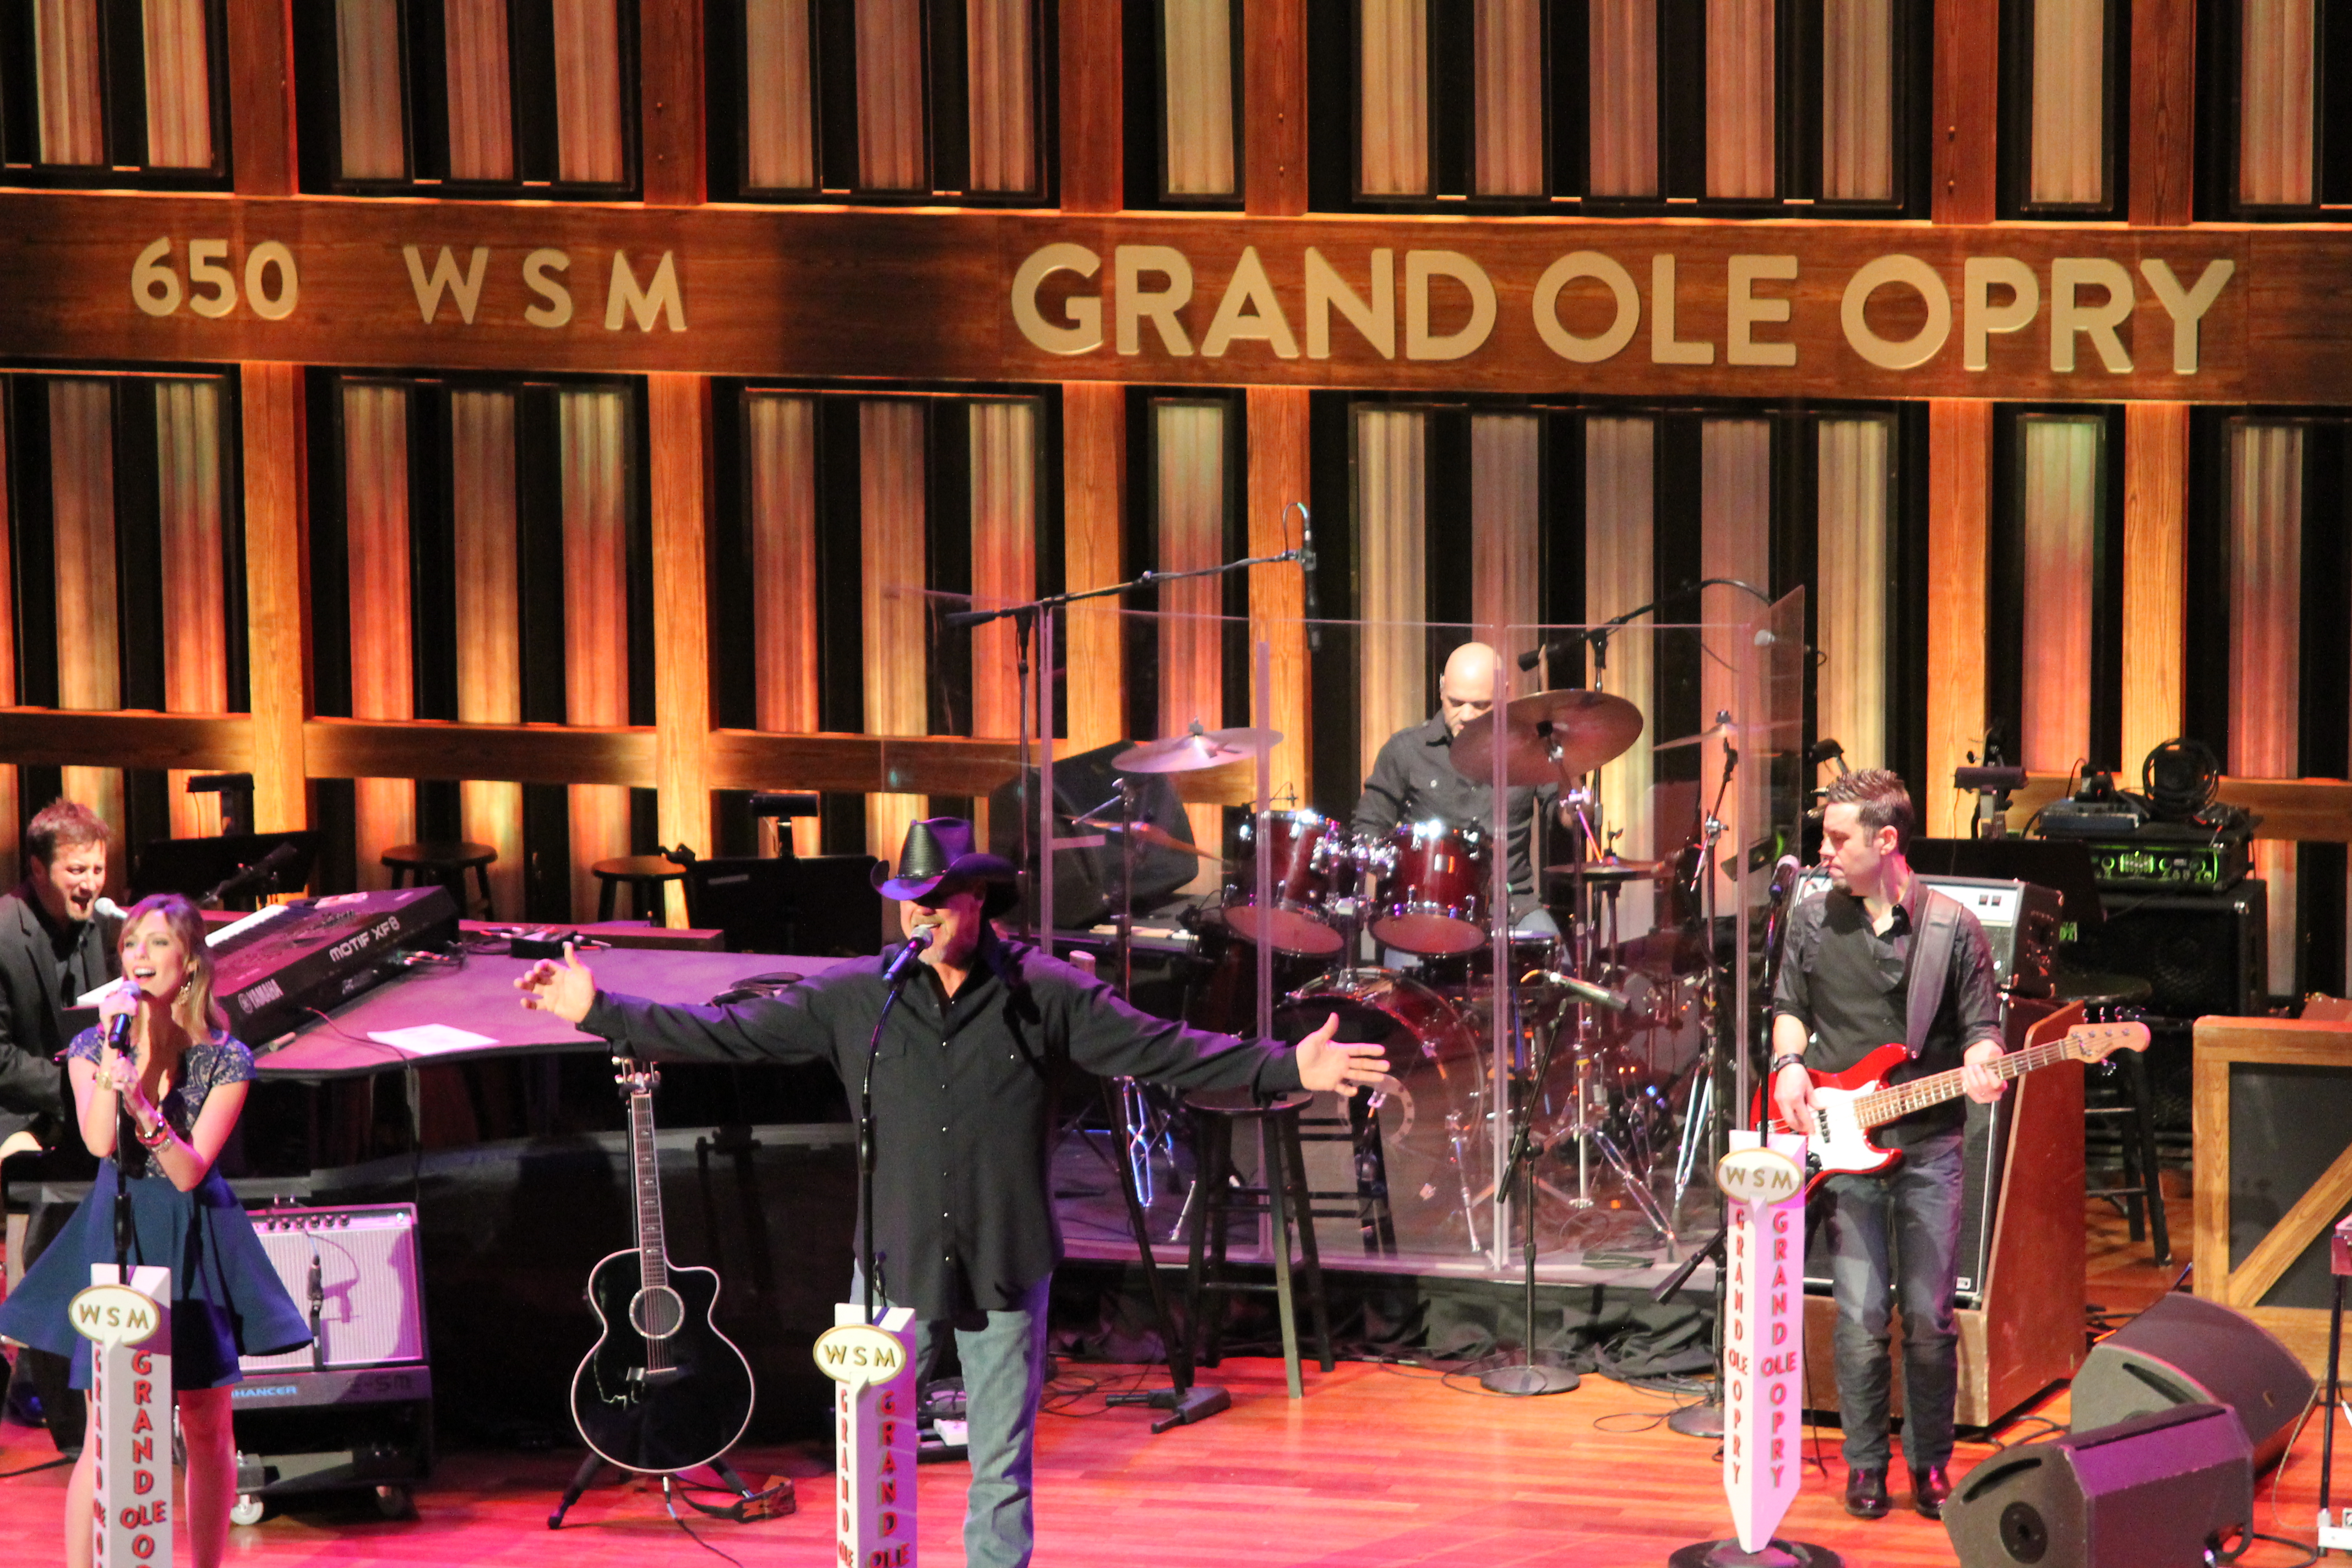 TRACE ATKINS at the Grand Ole Opry